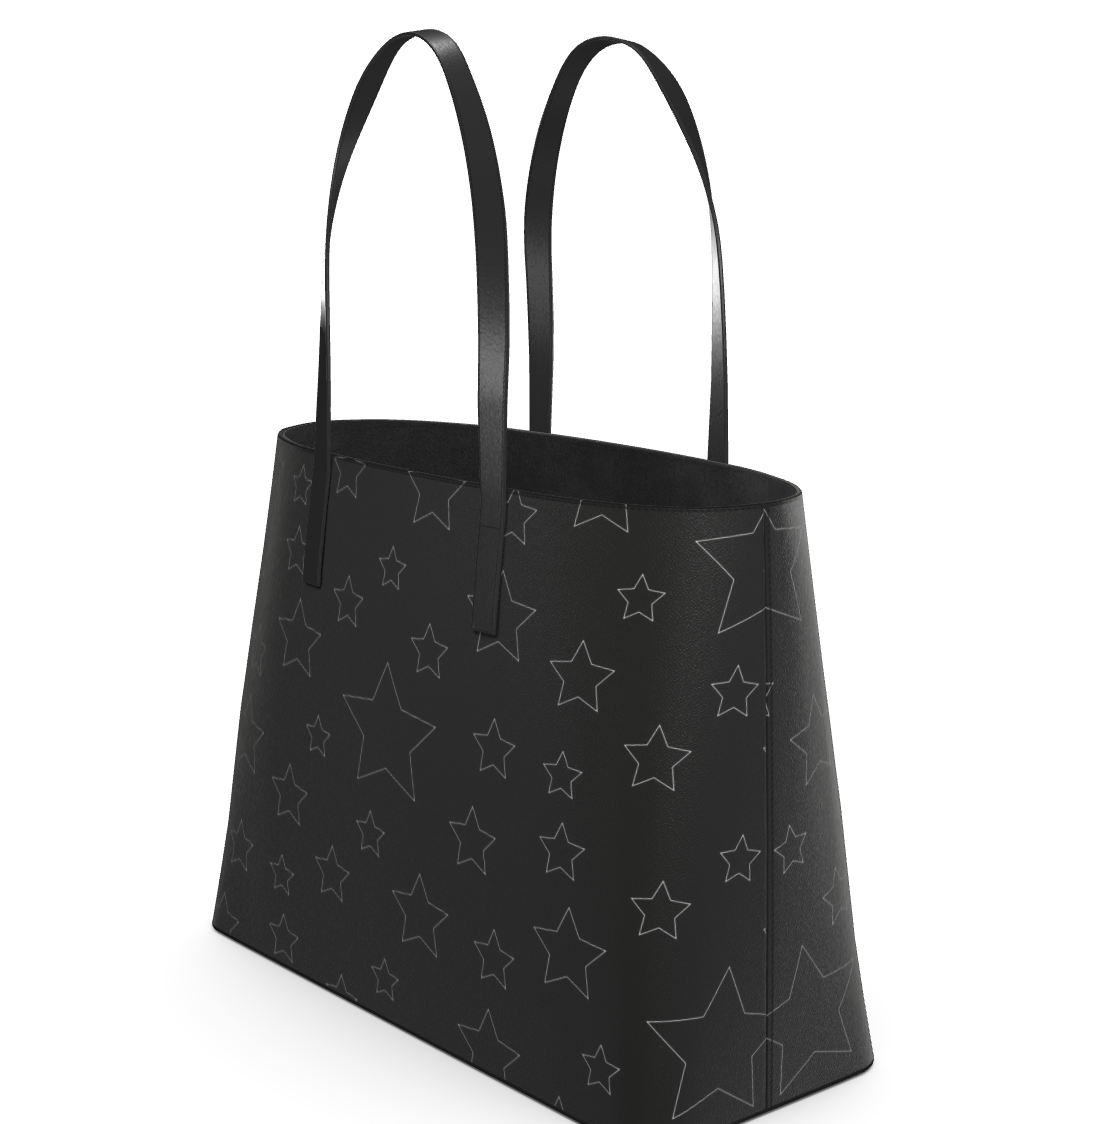 UNTITLED BOUTIQUE Black Leather Kika Stars Tote Bag - Limited Edition